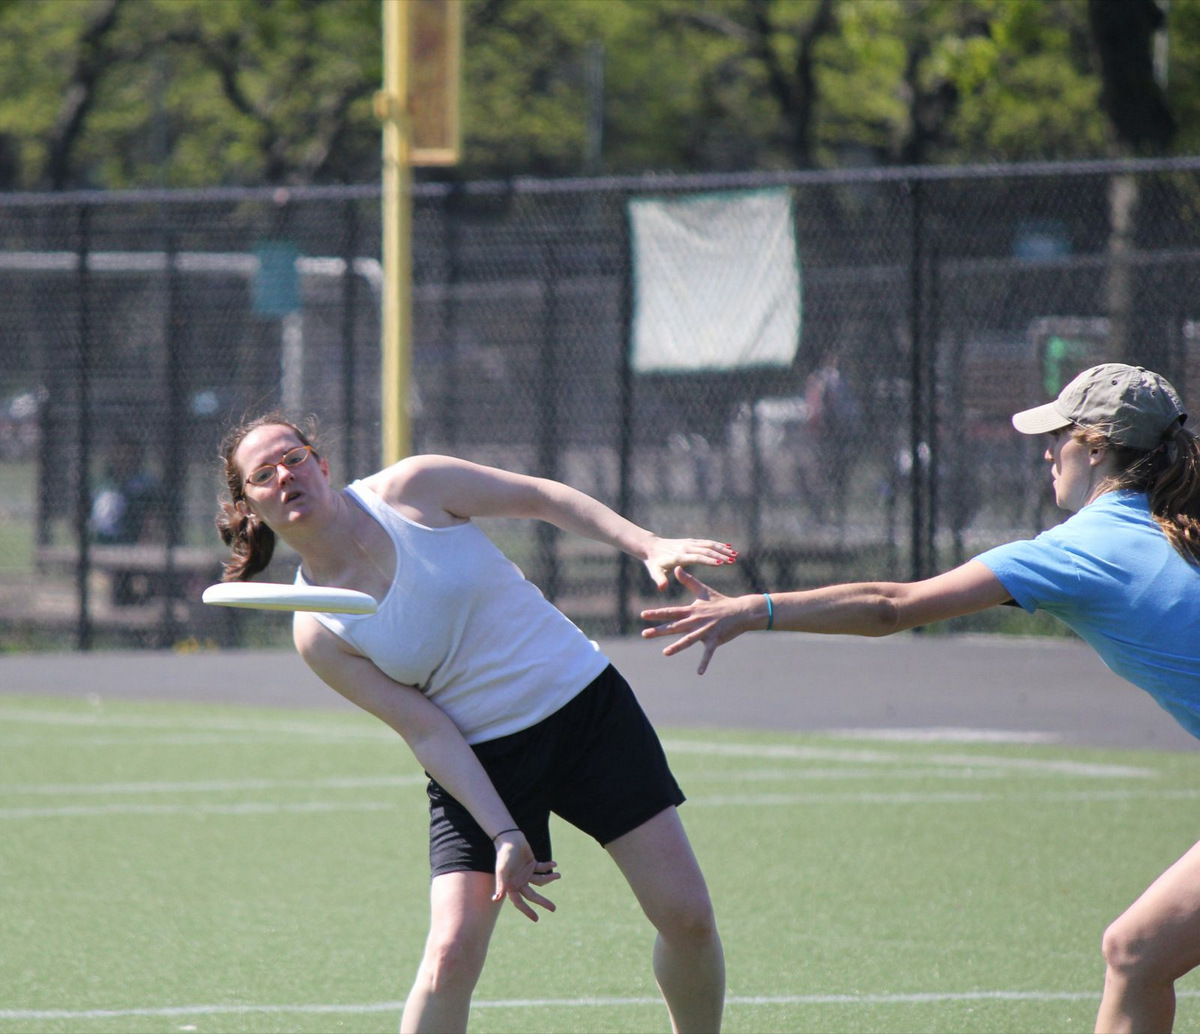 All Posts - DiscNY - NYC Ultimate Frisbee for Adults and Youth